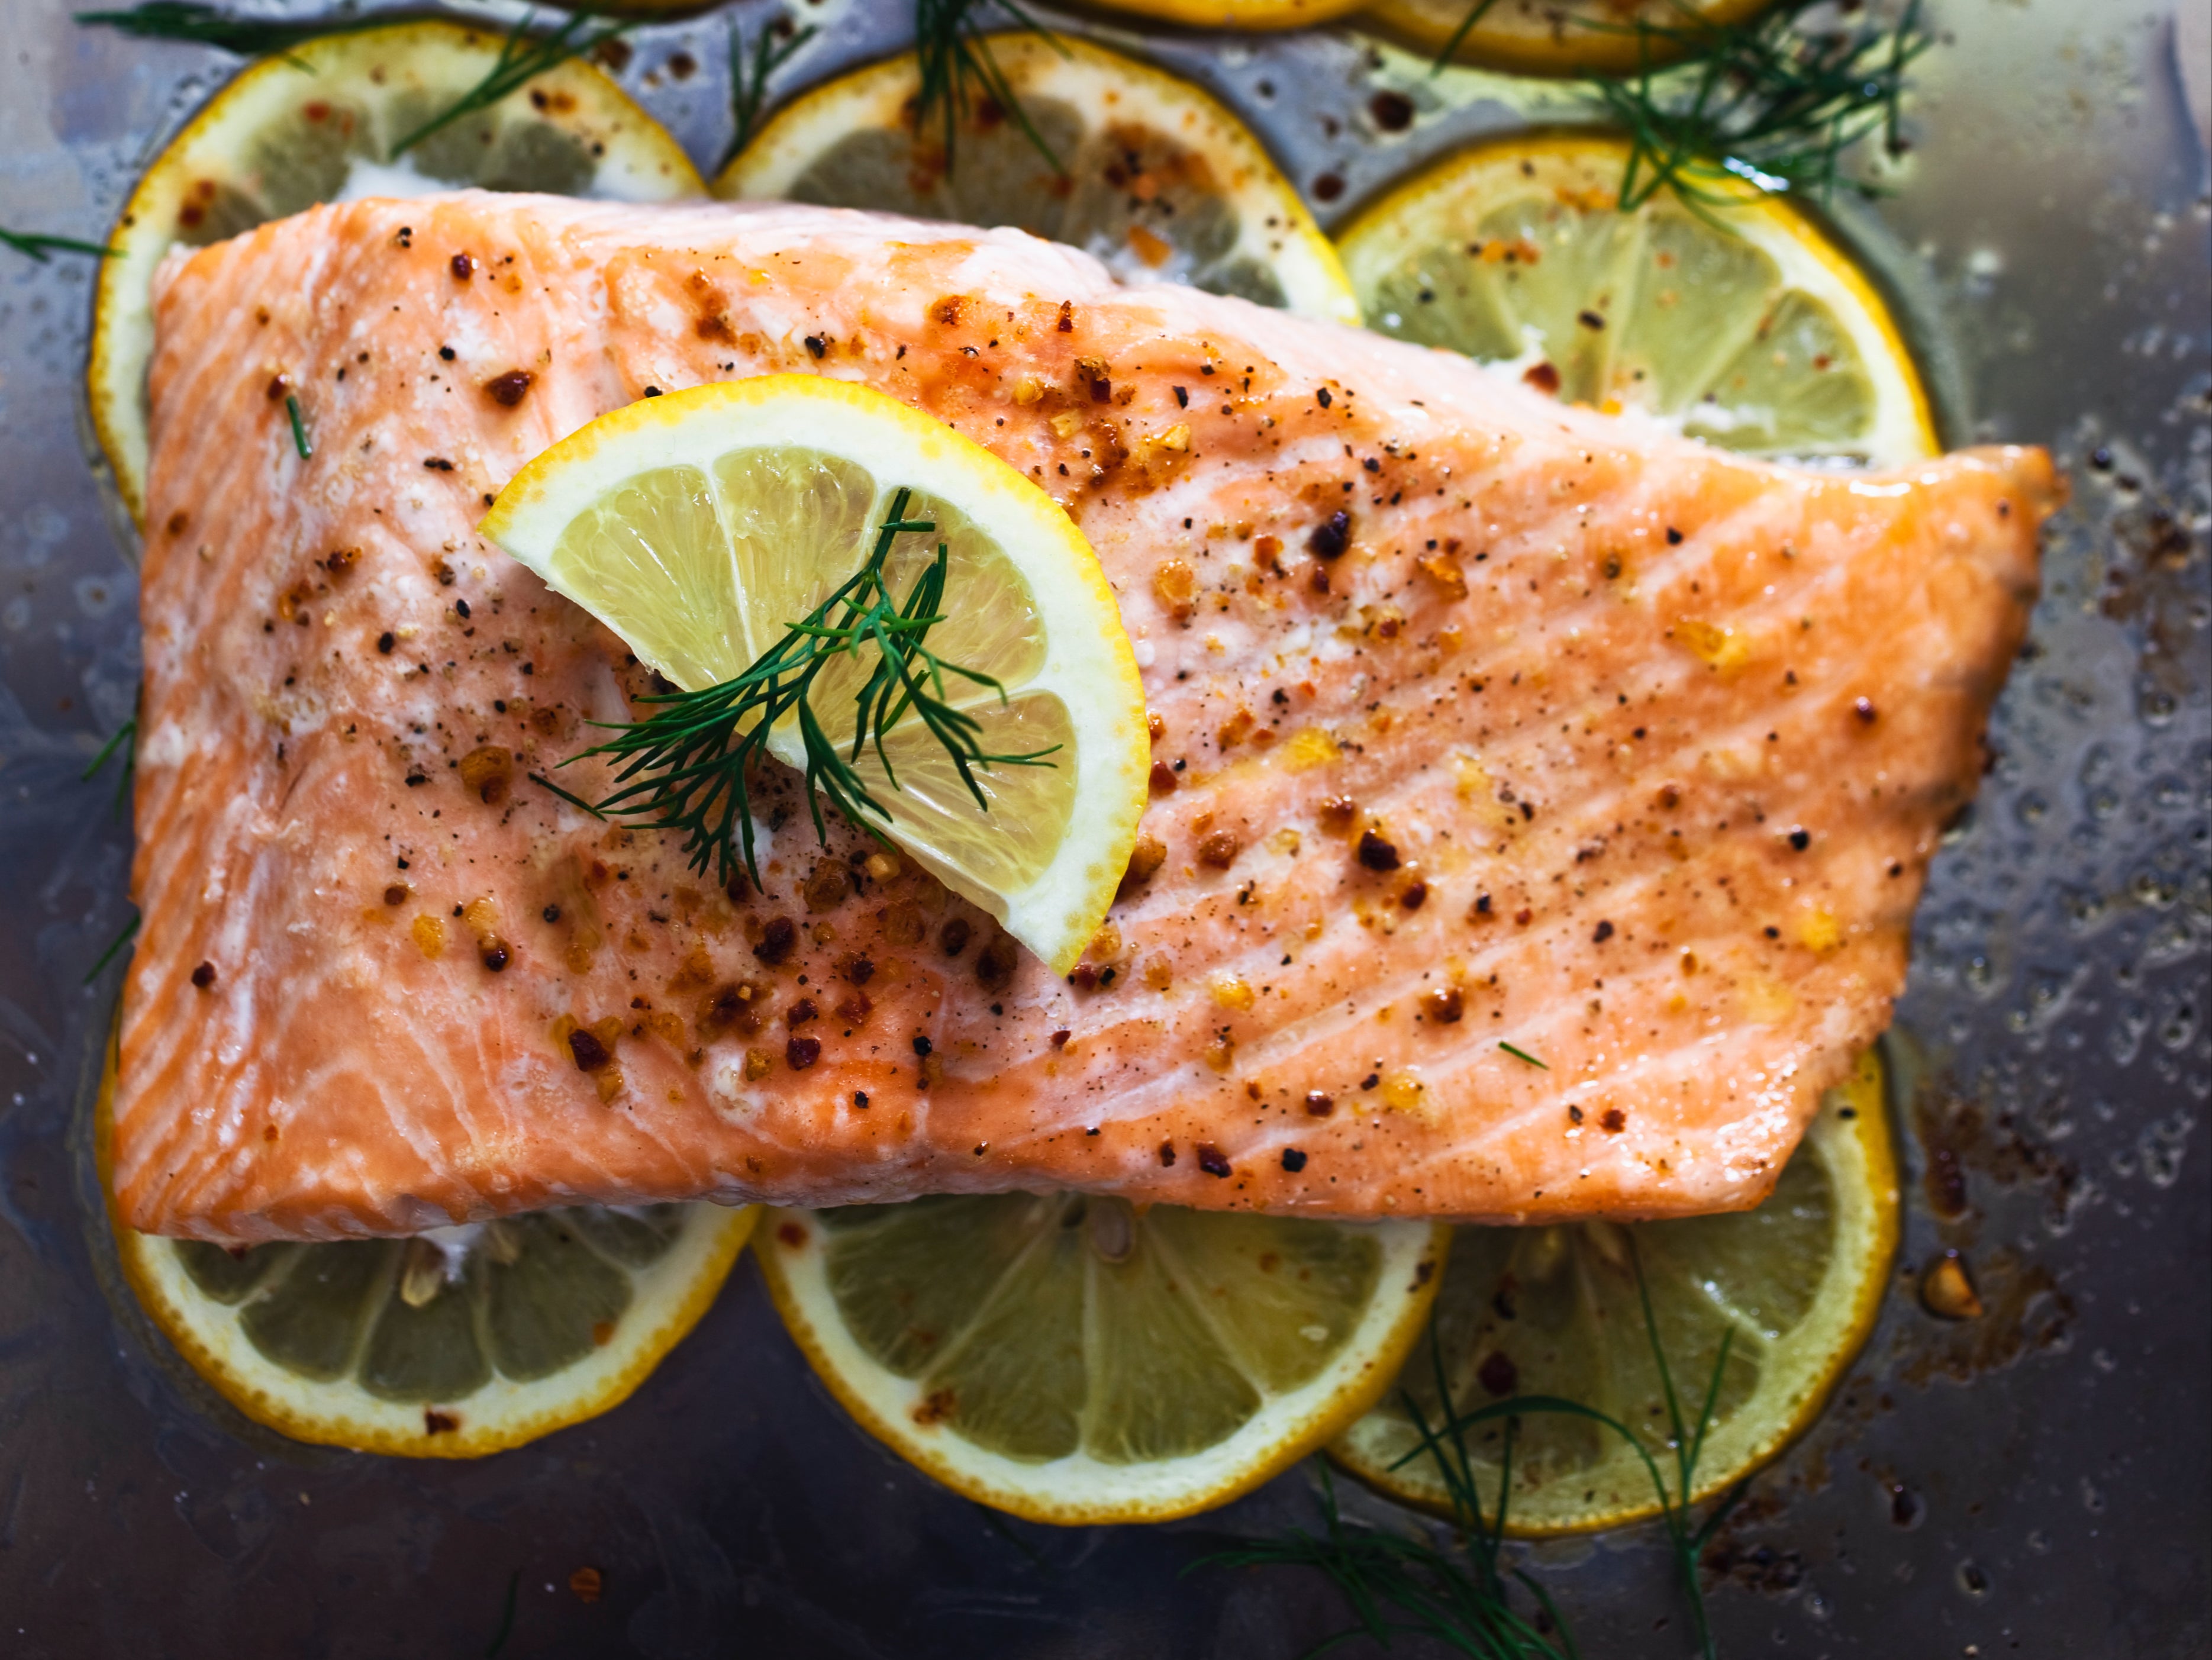 This done-in-a-flash grilled salmon shows the versatility of baking trays